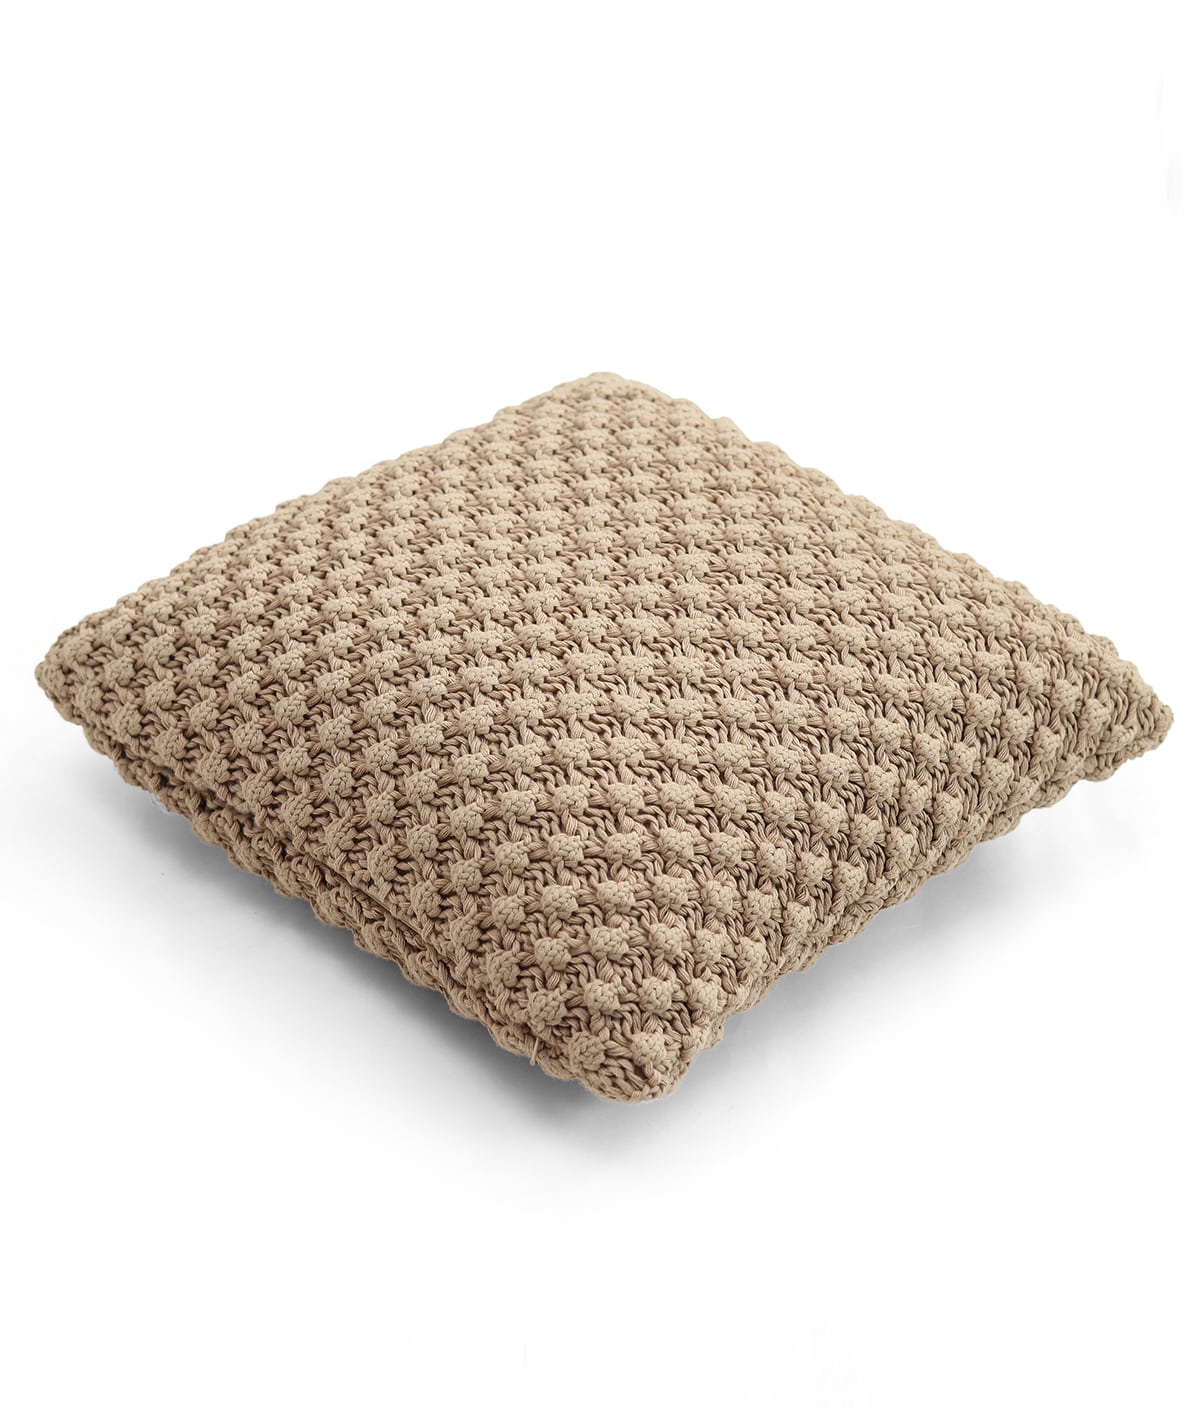 Popcorn Knit Light Beige Melange Cotton Knitted Decorative 16 X 16 Inches Cushion Cover